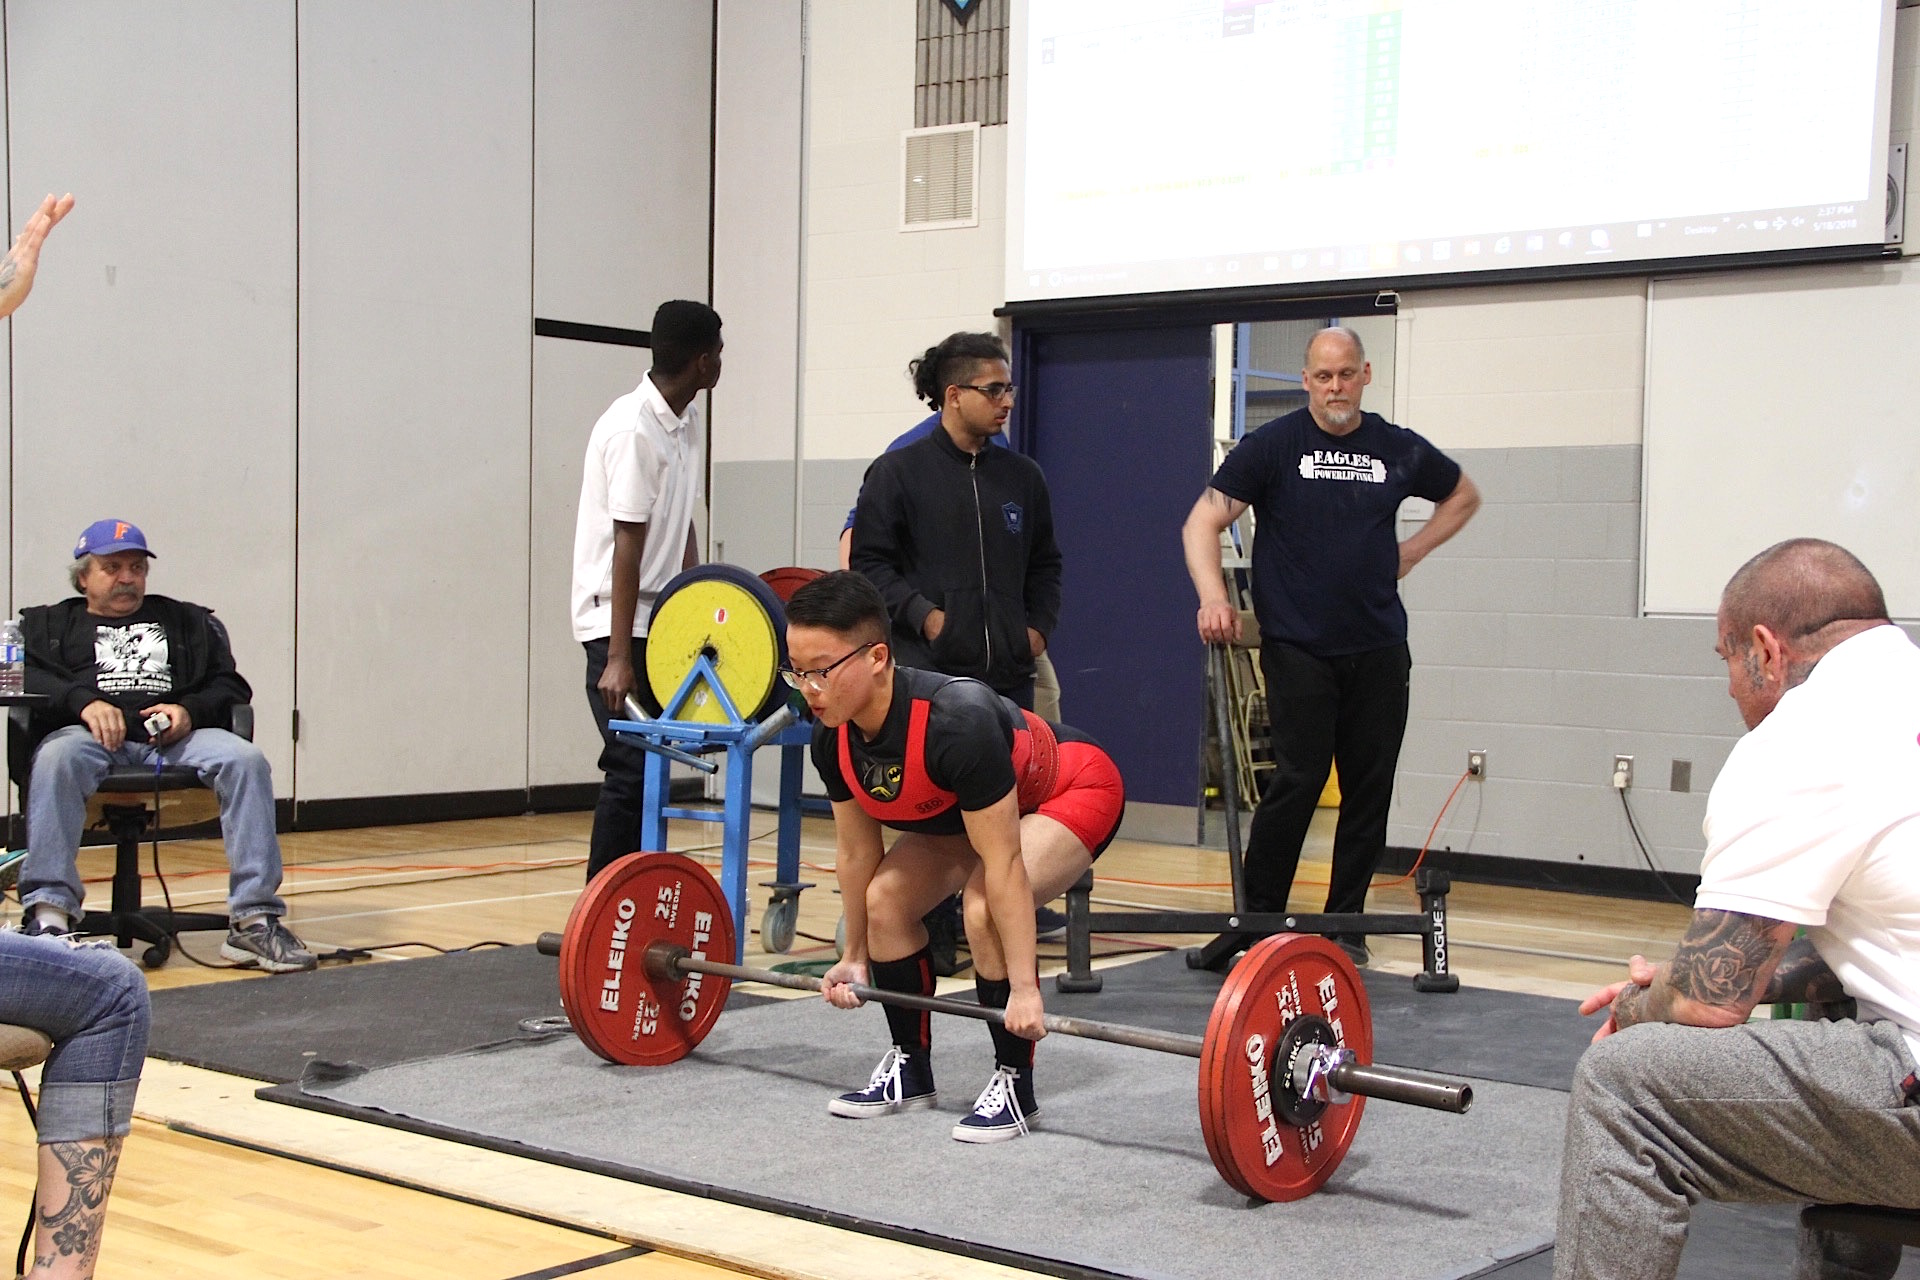 Milton High student beats world records in weightlifting